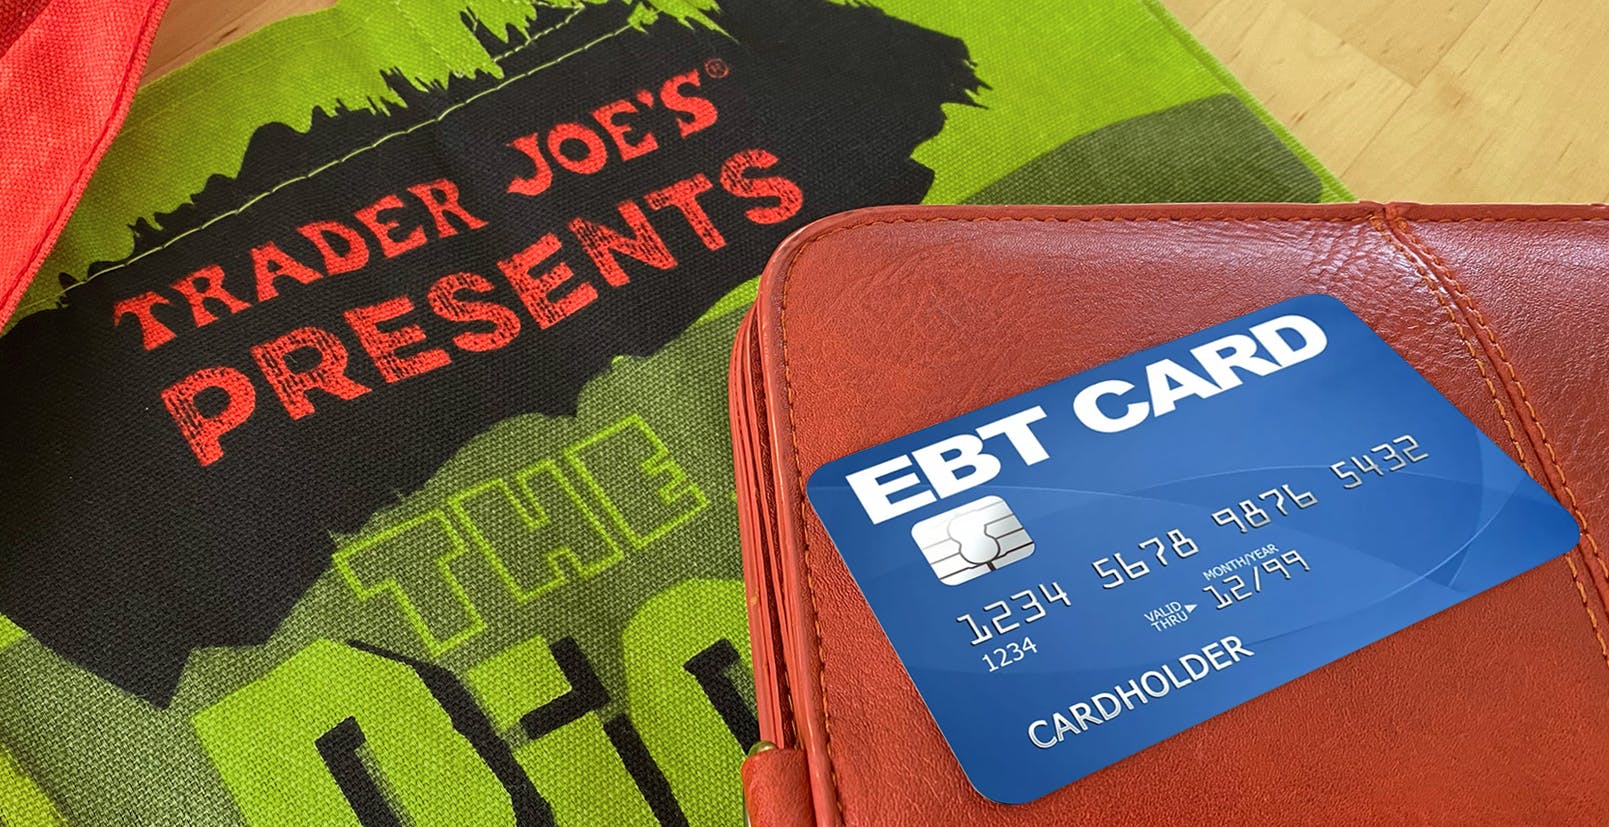 Does Trader Joes accept EBT? Find out here!